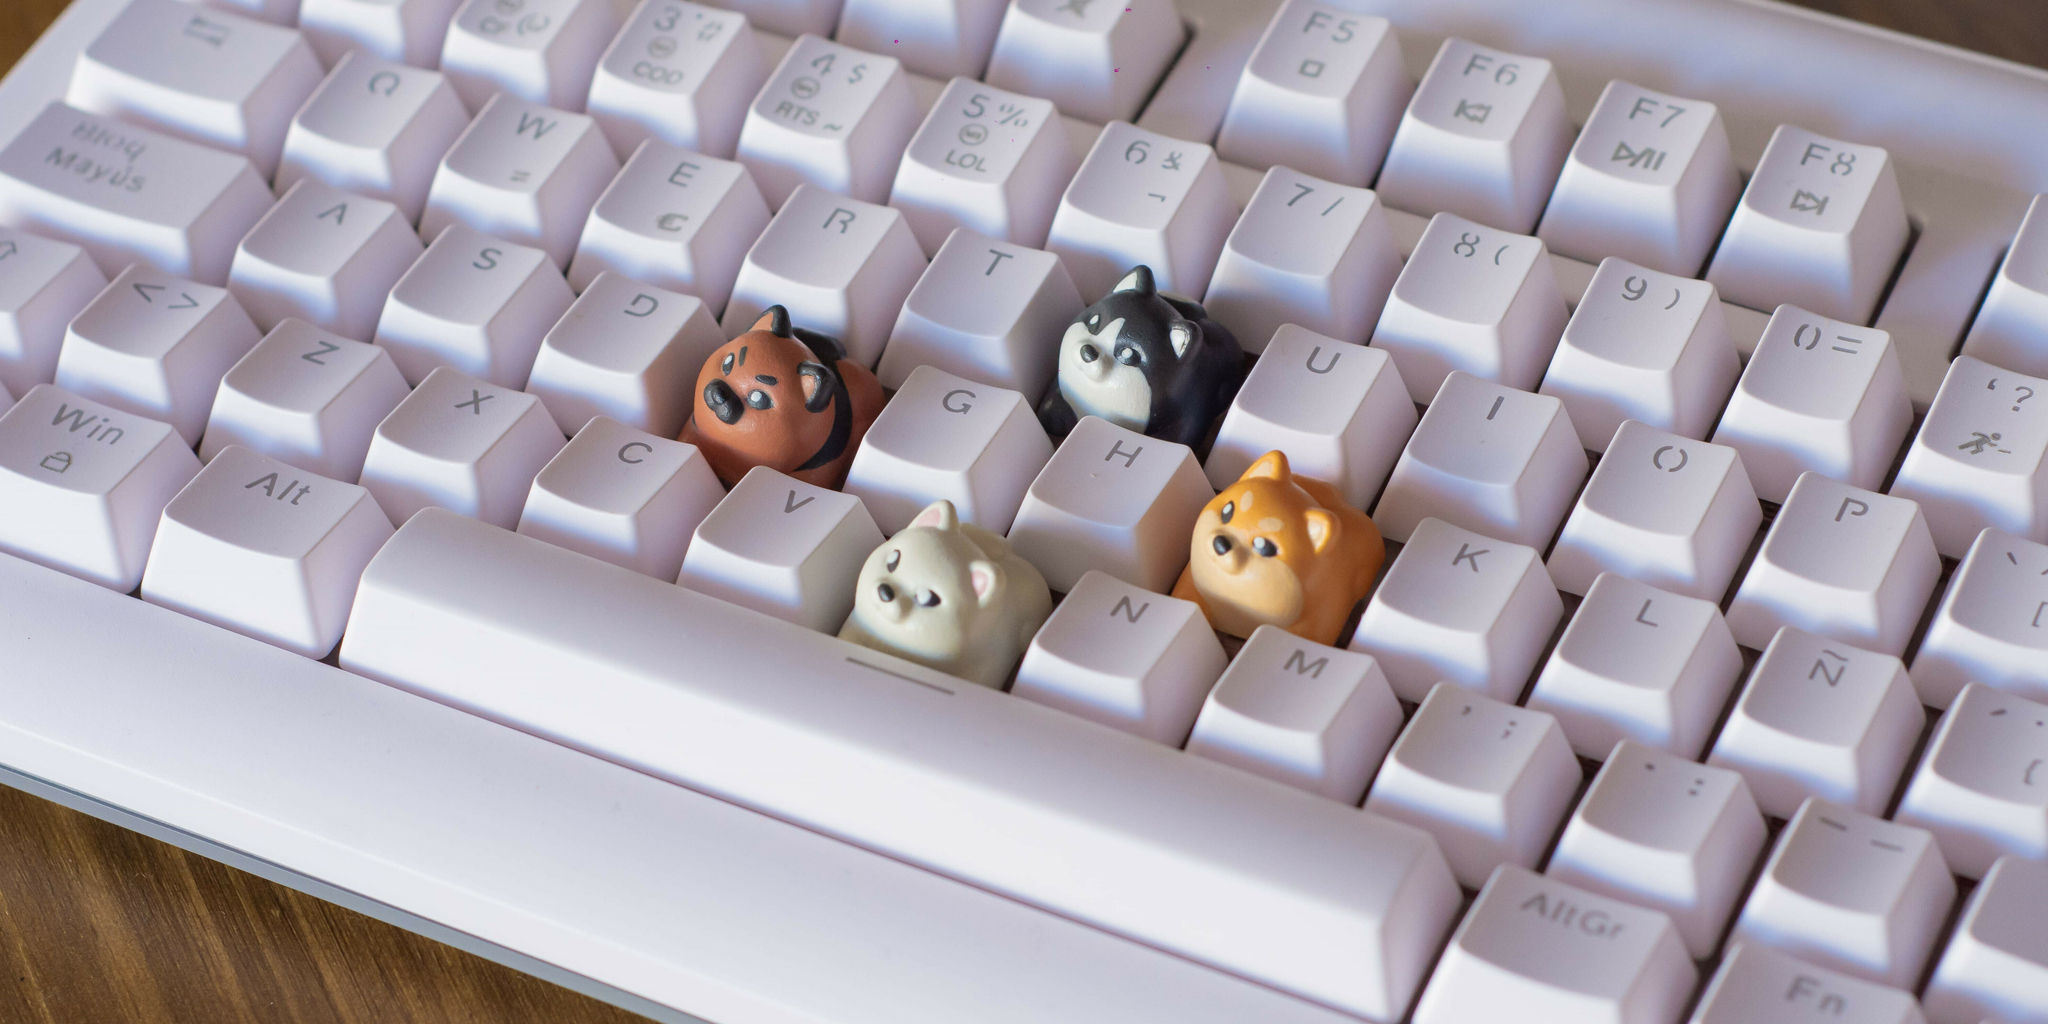 Find here a selection of the best 3D models of 3D printable files of keycaps for keyboards